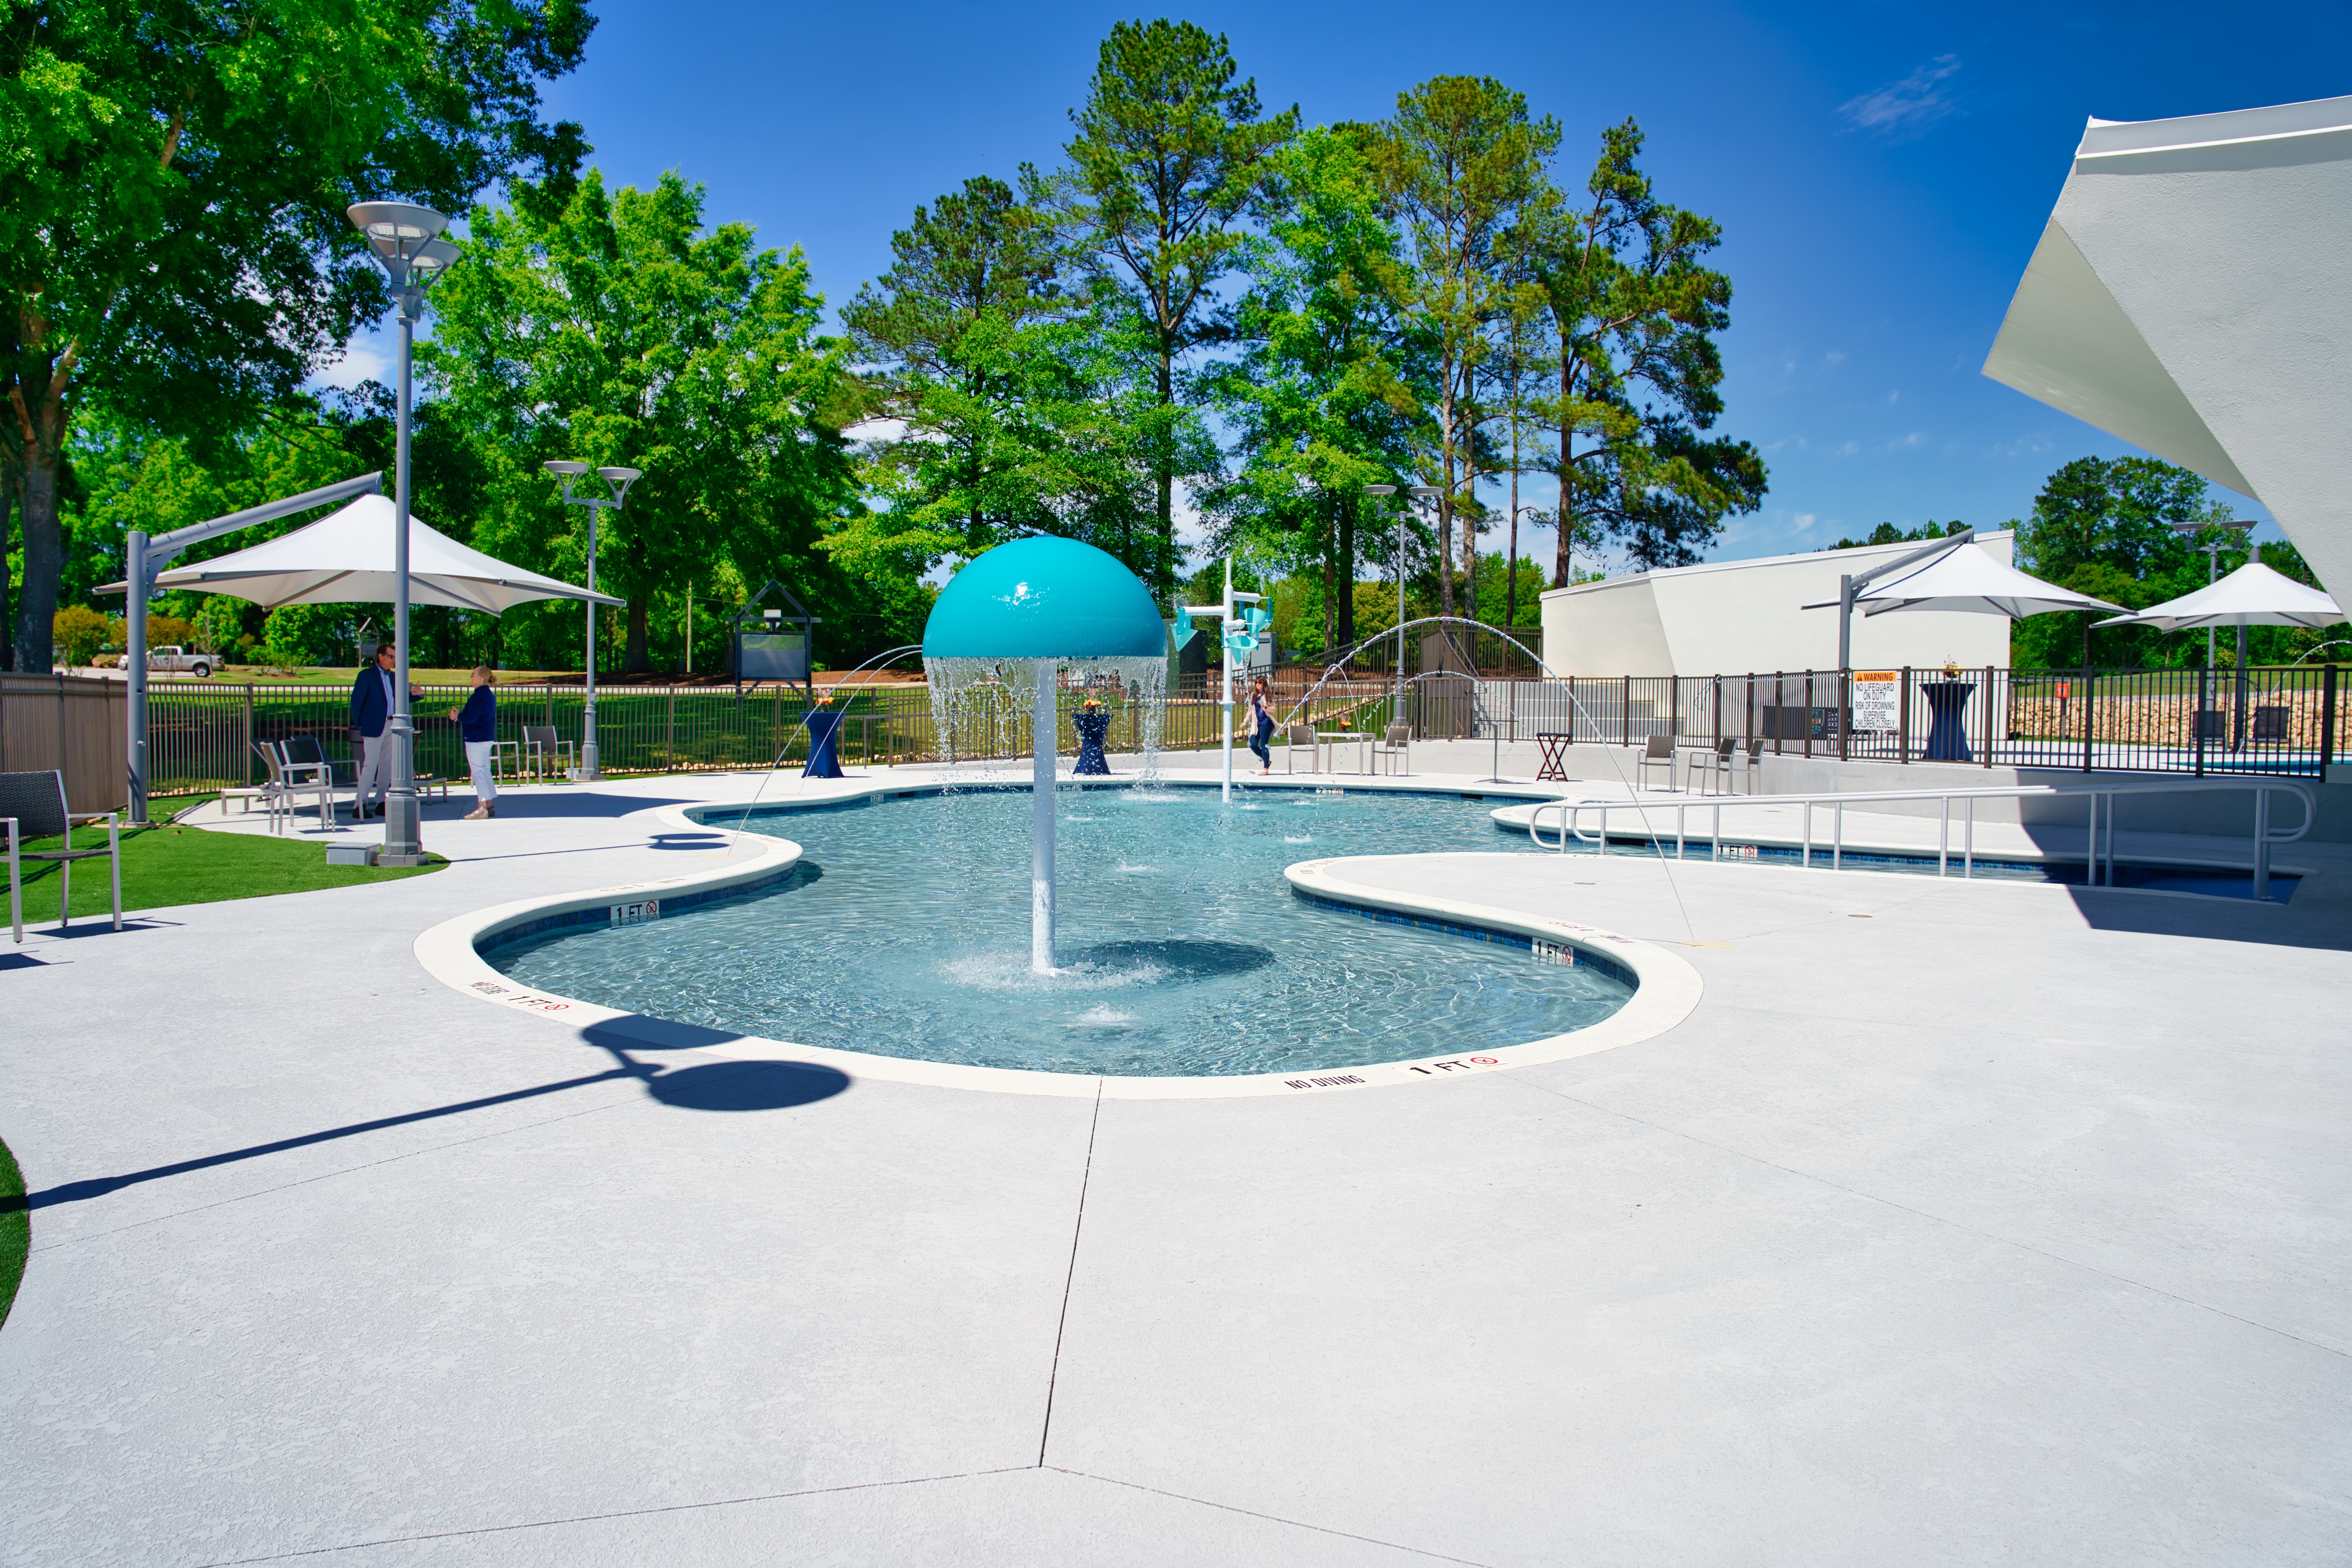 Summer campers and veterans alike will enjoy the beauty and tranquility of the Aquatics Center's spacious deck and zero-entry pools. 